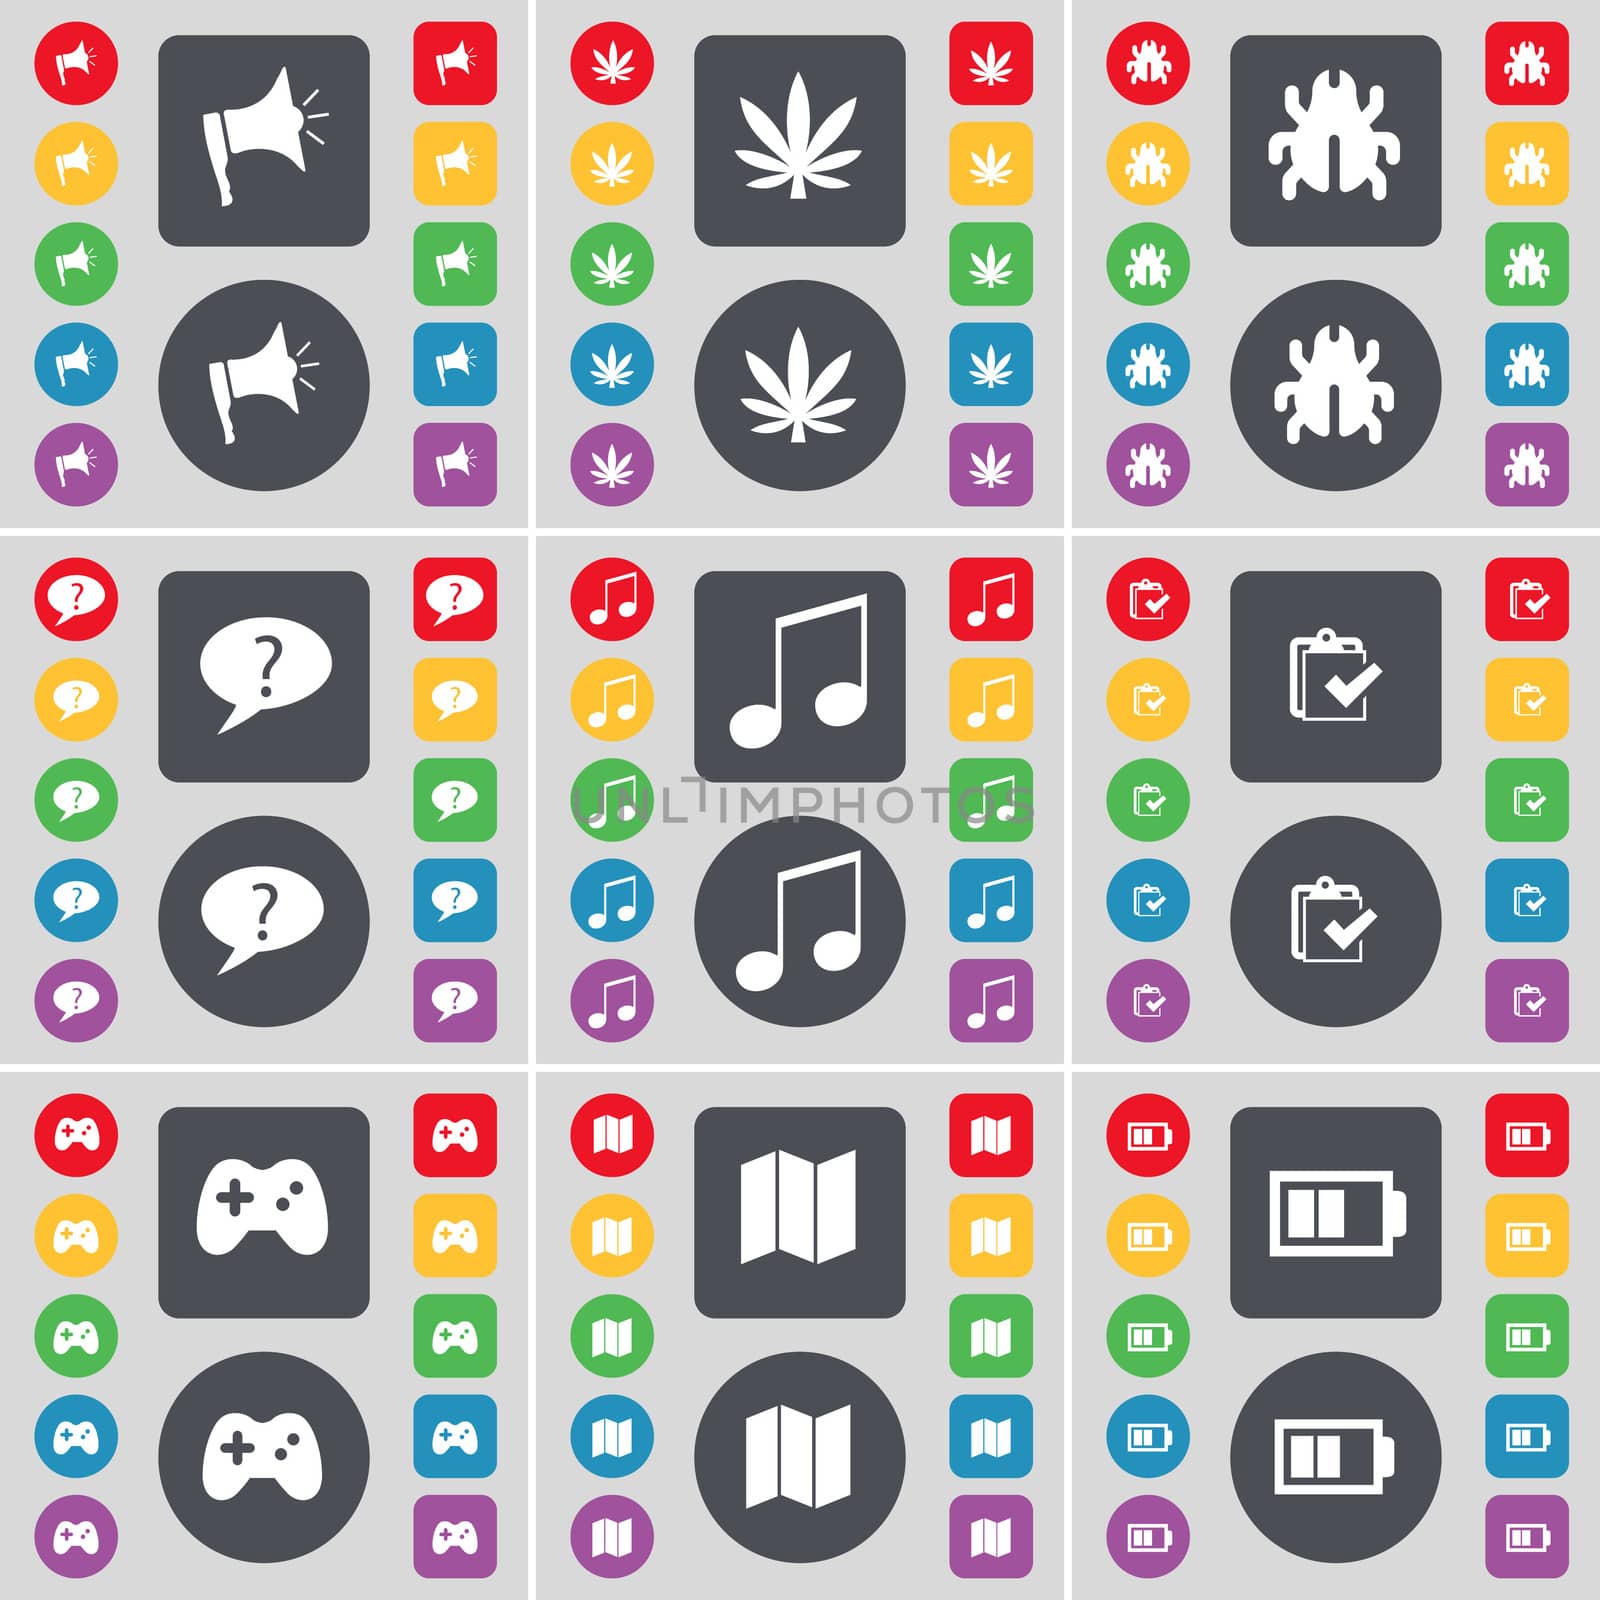 Megaphone, Marijuana, Bug, Chat bubble, Note, Survey, Gamepad, Map, Battery icon symbol. A large set of flat, colored buttons for your design.  by serhii_lohvyniuk